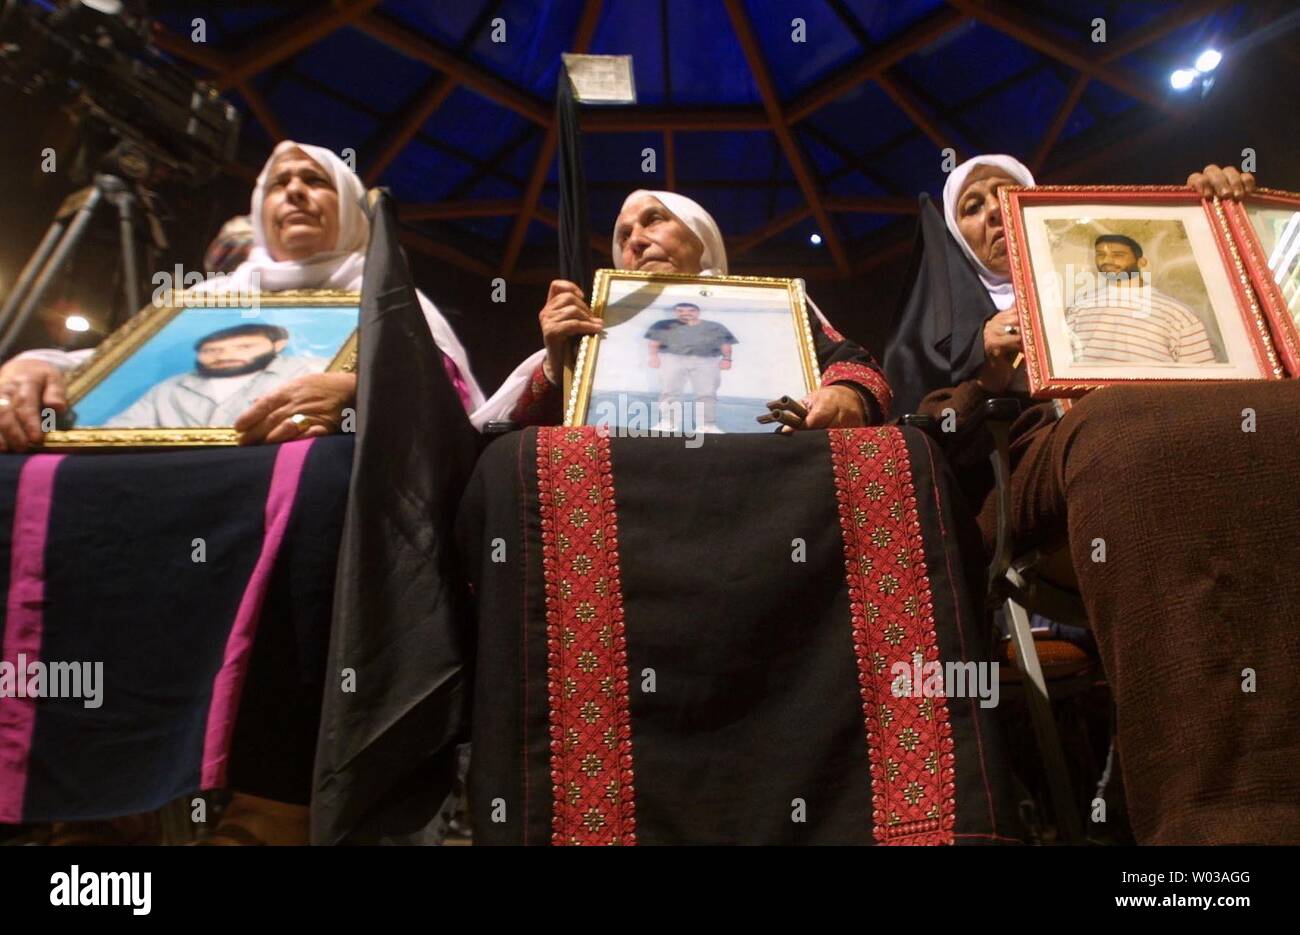 Palestinian women hold pictures of loved ones being held in Israeli jails as they sit at the front of a gathering of groups opposed to the Geneva Accord in Gaza City, Monday, Dec. 1, 2003. A symbolic Middle East peace plan dubbed 'the Geneva Accord' is due to be launched in a ceremony in Switzerland on Monday. By laying out steps to overcome longstanding obstacles to a 'two-state solution' in the Israeli-Palestinian conflict, the document goes beyond a U.S.-backed 'road map.'   (UPI photo/ Ismael Mohamad ) Stock Photo